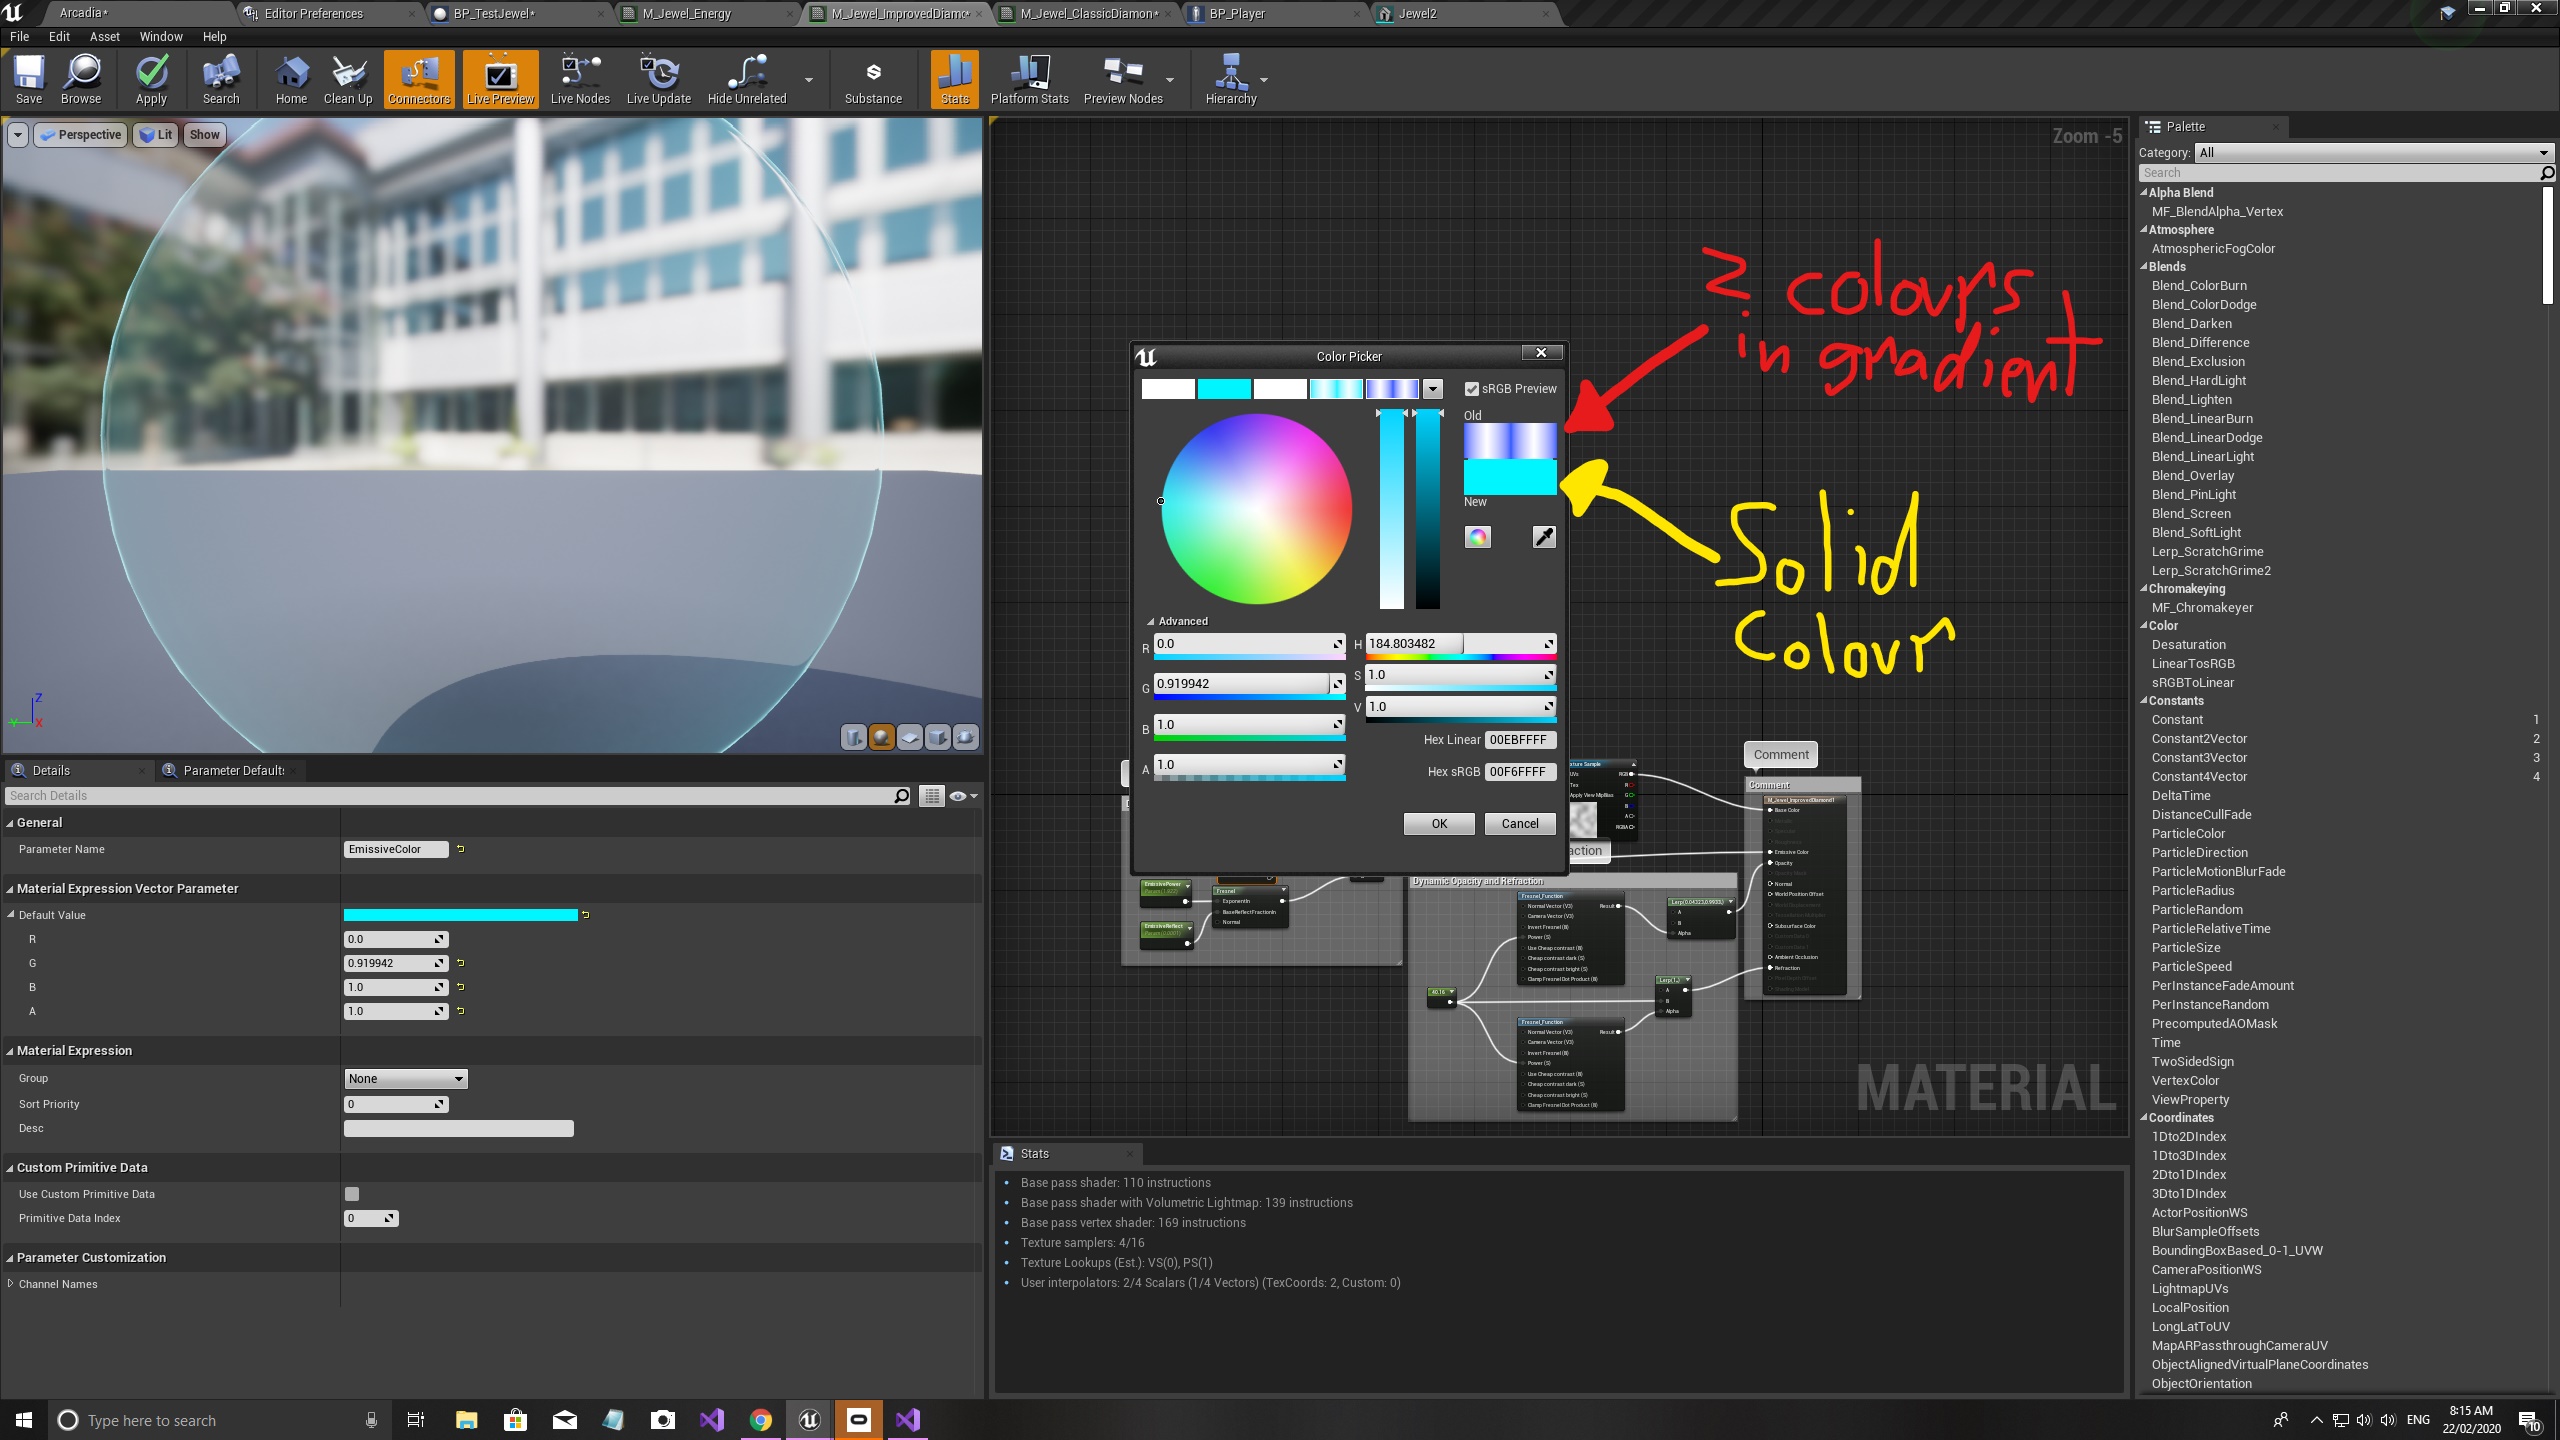 How can i create a colour in blueprints for a material in Unreal which consists of 2 colours that create a gradient?